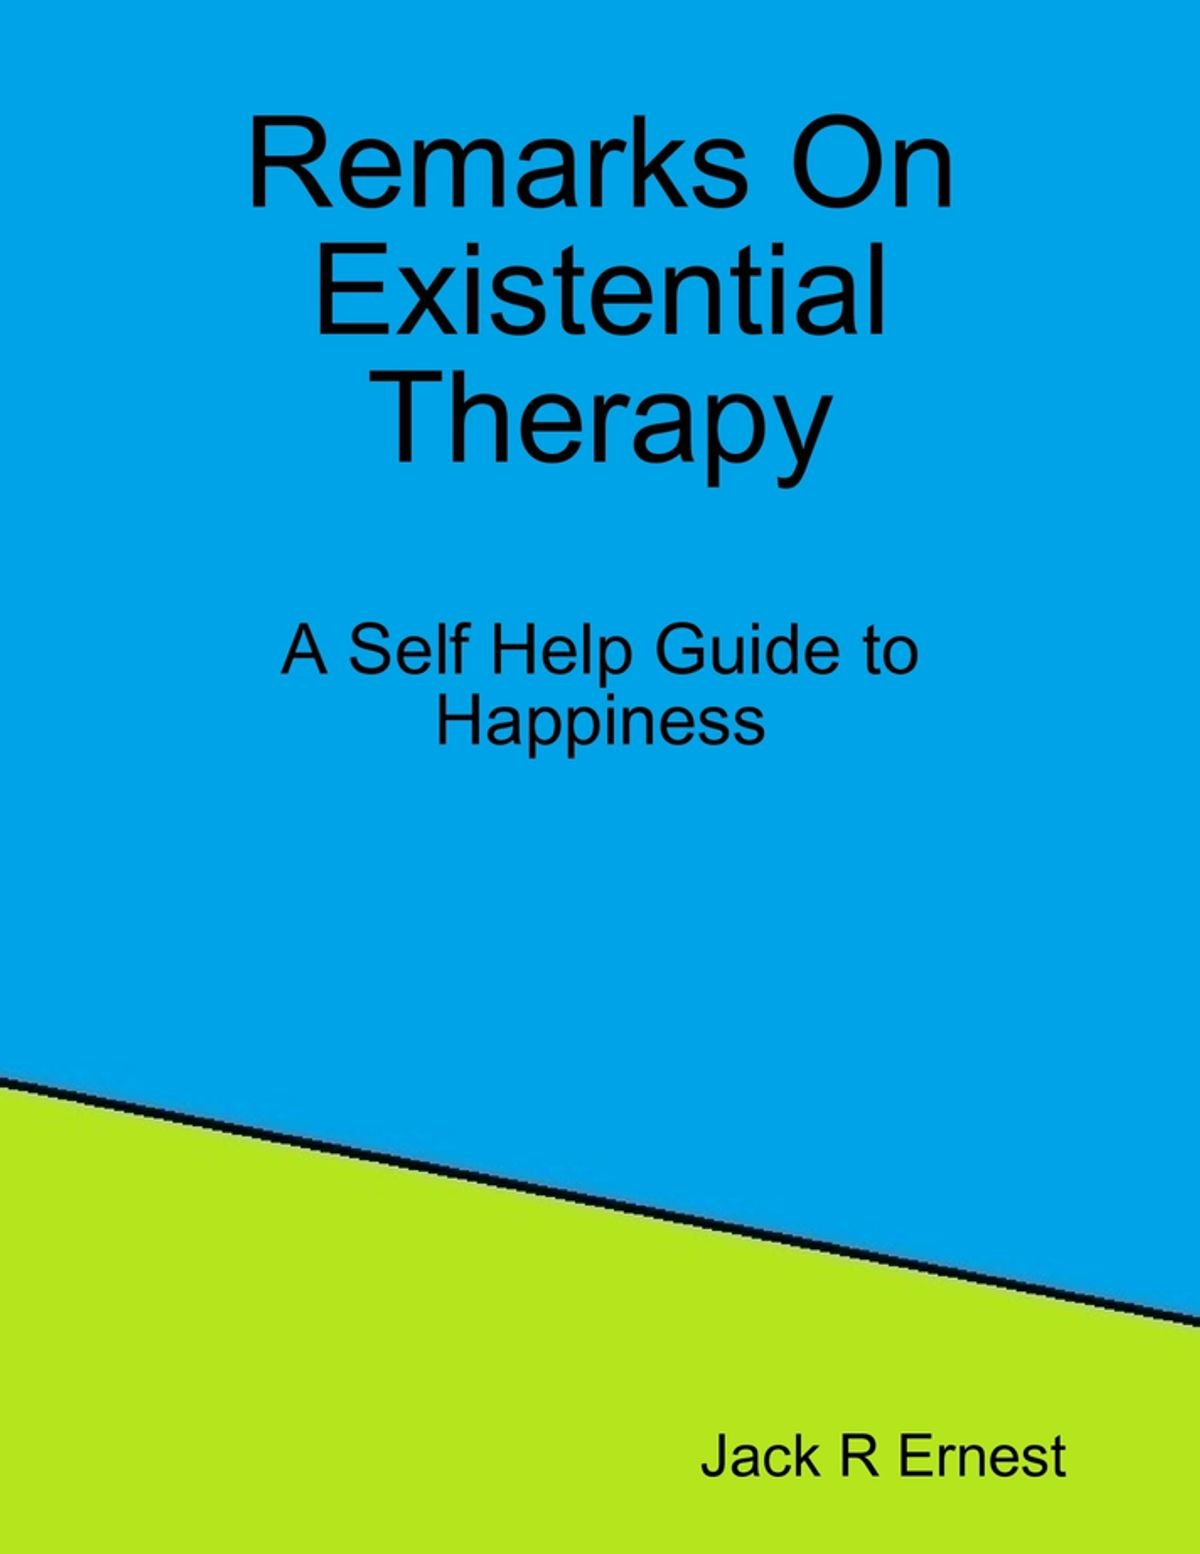 Self Help Therapy Or Group Definition With Addiction Treatment Or Get Self Help Worksheets